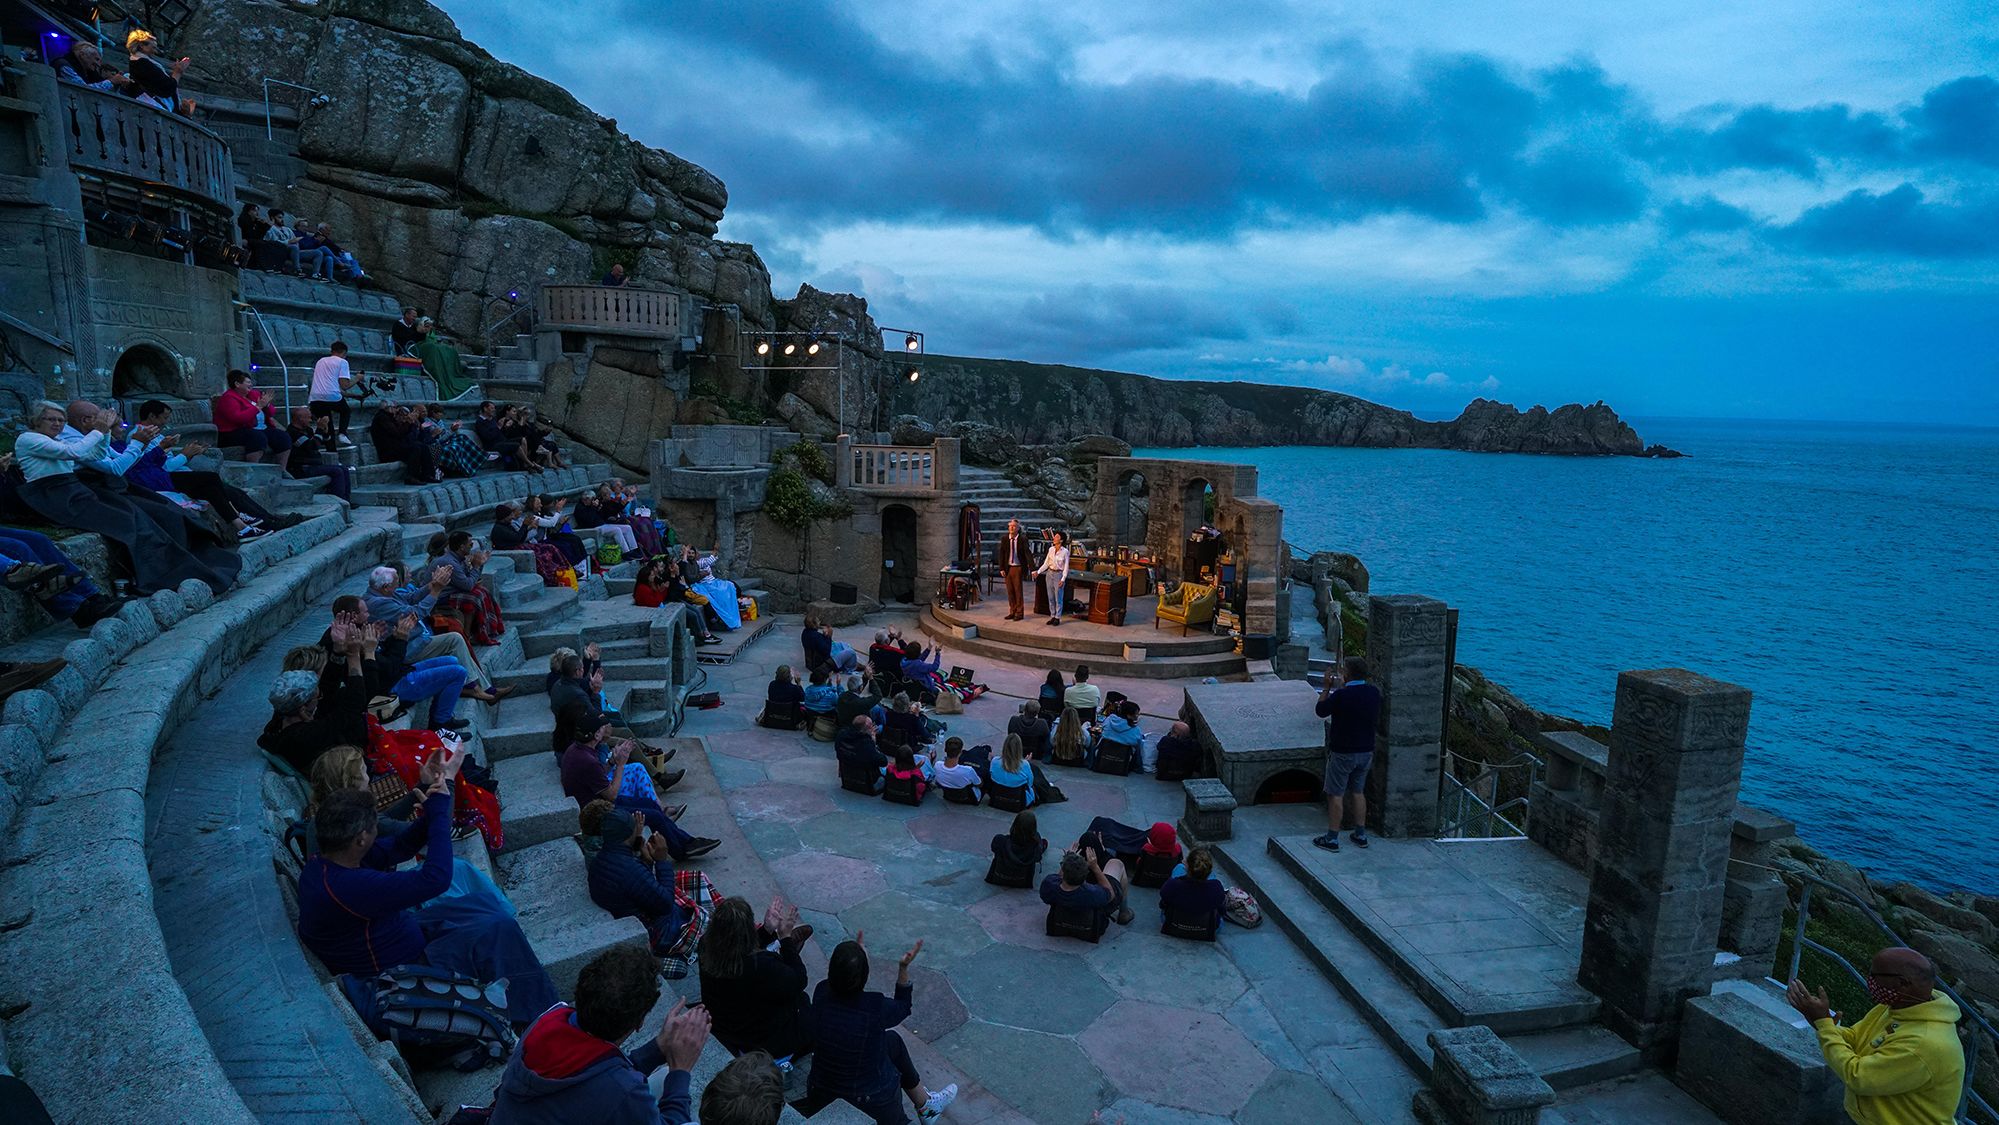 Actors Jessica Johnson and Stephen Tompkinson perform at the Minack Theatre in Porthcurno, England, during a production of Willy Russell's "Educating Rita" on August 18.